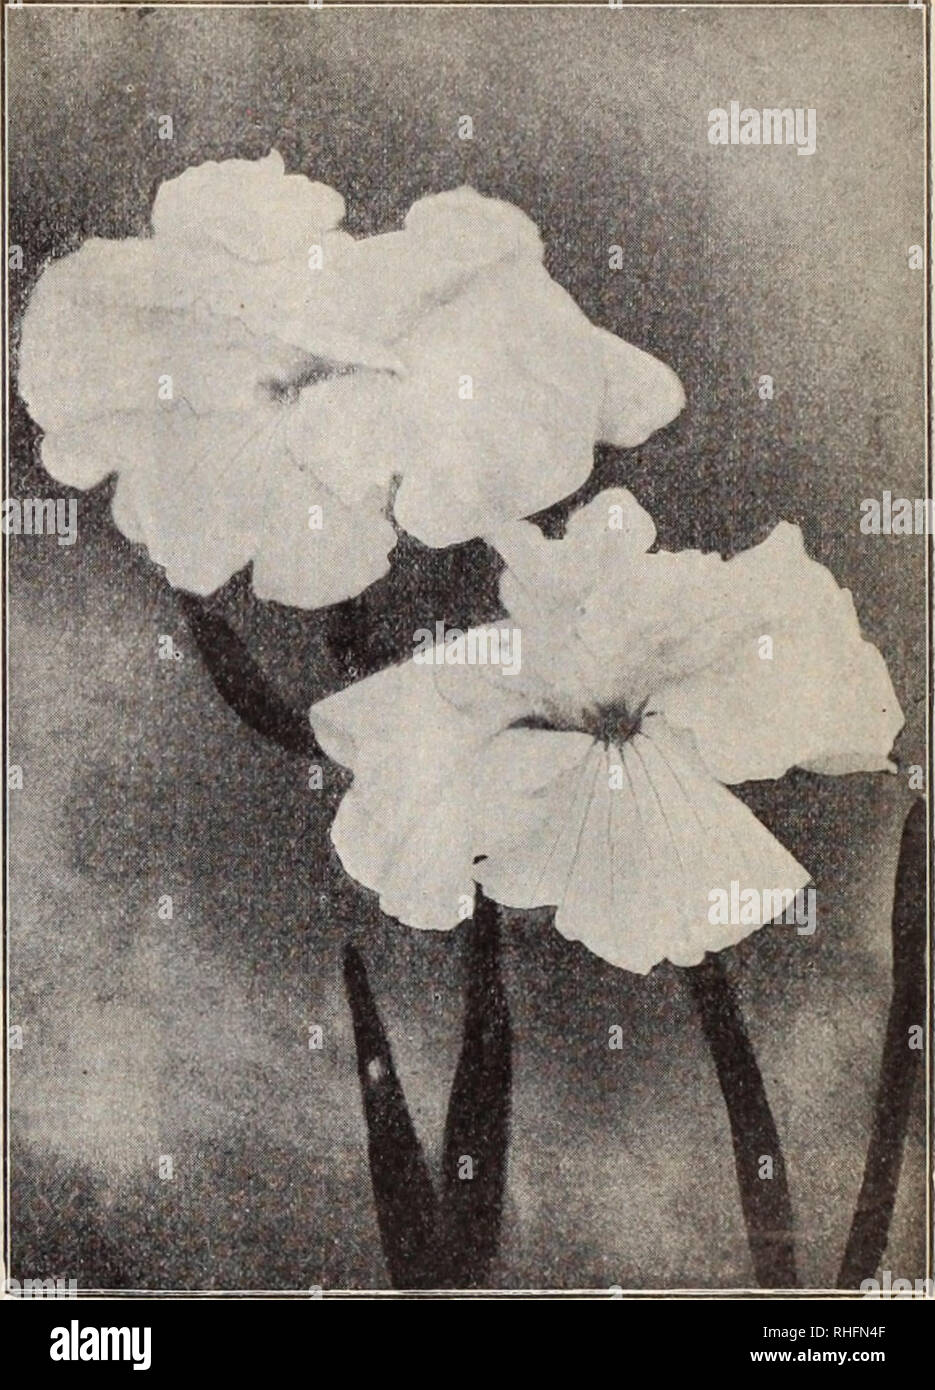 . Boddington's quality bulbs, seeds and plants / Arthur T. Boddington.. Nursery Catalogue. BODDINGTON'S JAPANESE IRIS (Iris Kaempferi) The Japanese Iris is the most showy and strikin^;Iy beautiful of all the large family of Iris; and very few flowers, the orchid not bein^^ excepted, surpass this unique flower in size and gorgeousness and variety of color, which ranges from snow-white to the deepest purple, striped, variegated and multicolored in the greatest profusion of coloring. The collections which we offer below are American grown, thor- oughly acclimated and hardy and true to cokir and n Stock Photo